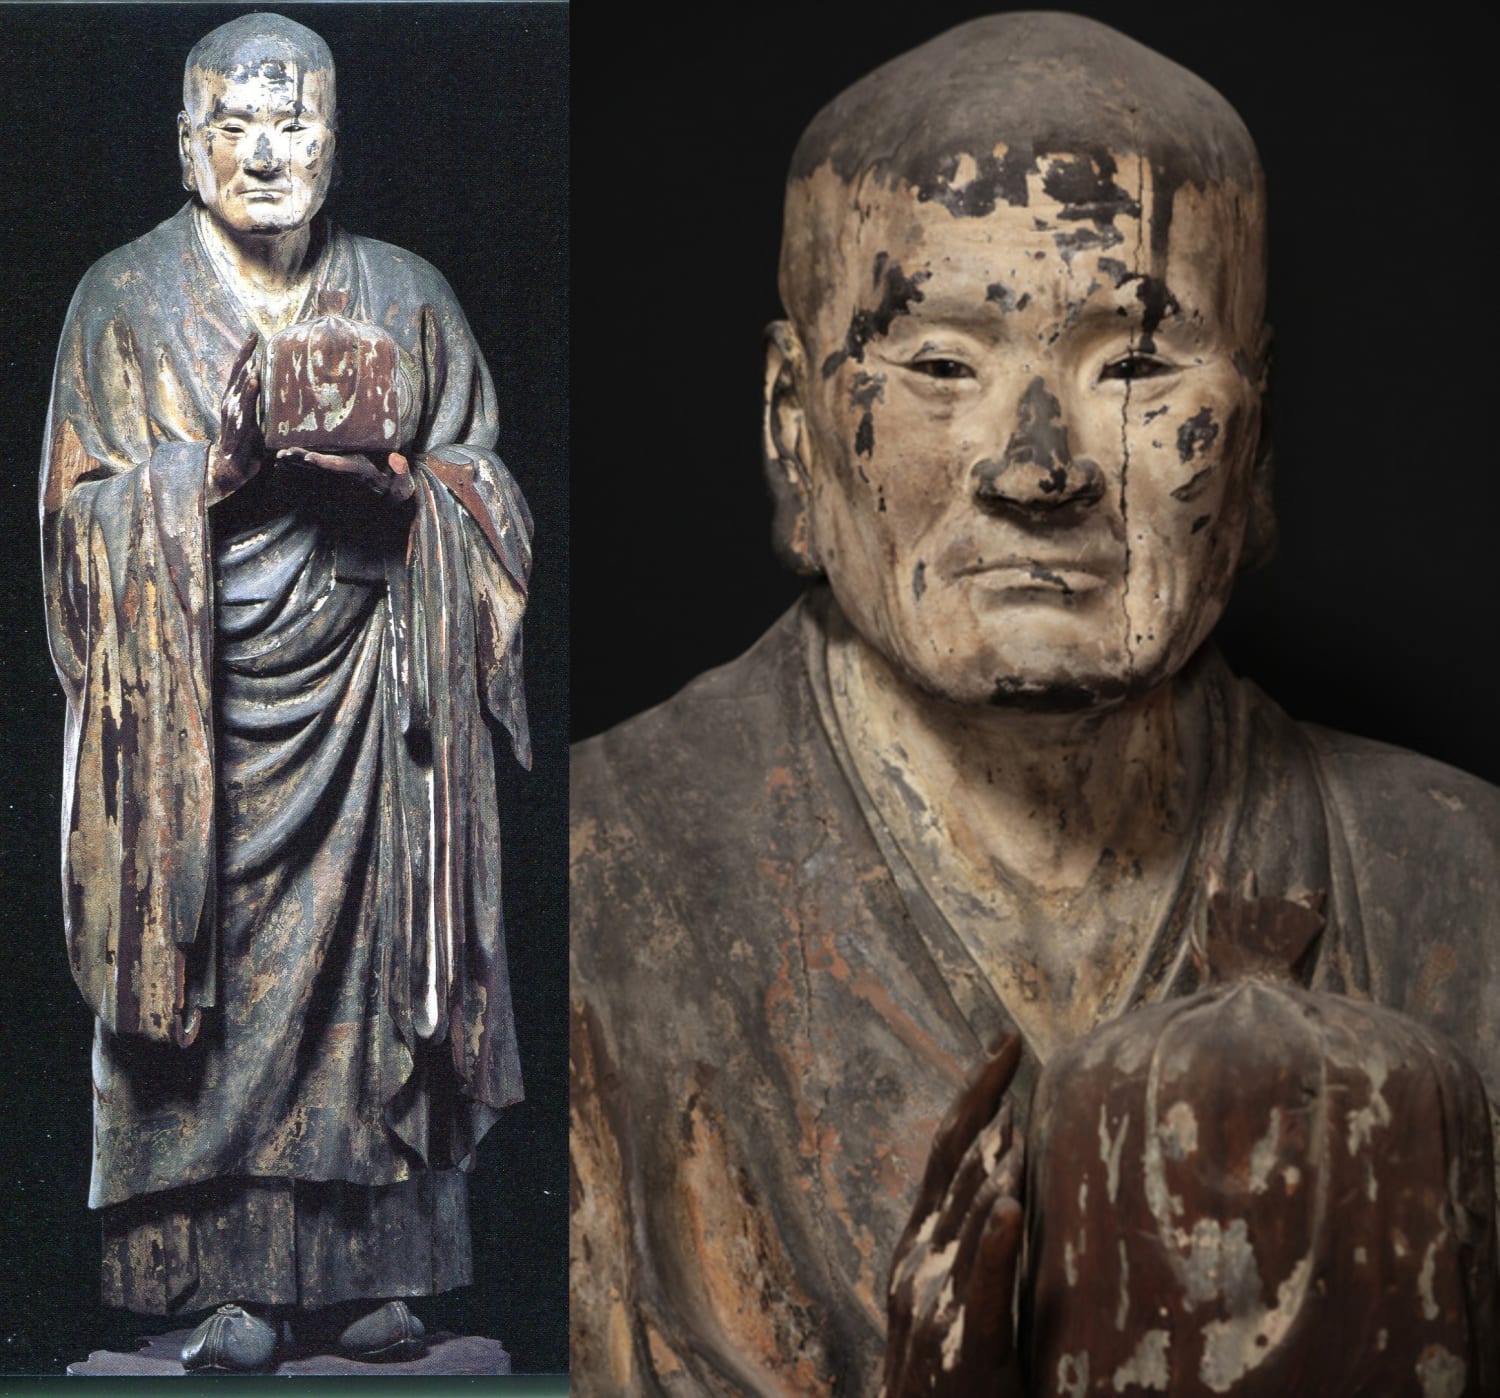 Statue of Asanga (a 4th century CE Indian scholar who is considered one of the most important spiritual figures of Mahayana Buddhism) made by Unkei, Japan's most famous Buddhist sculptor. Wood with paint and inlaid crystal eyes. Kamakura period, 1212 CE, Kōfuku-ji Temple